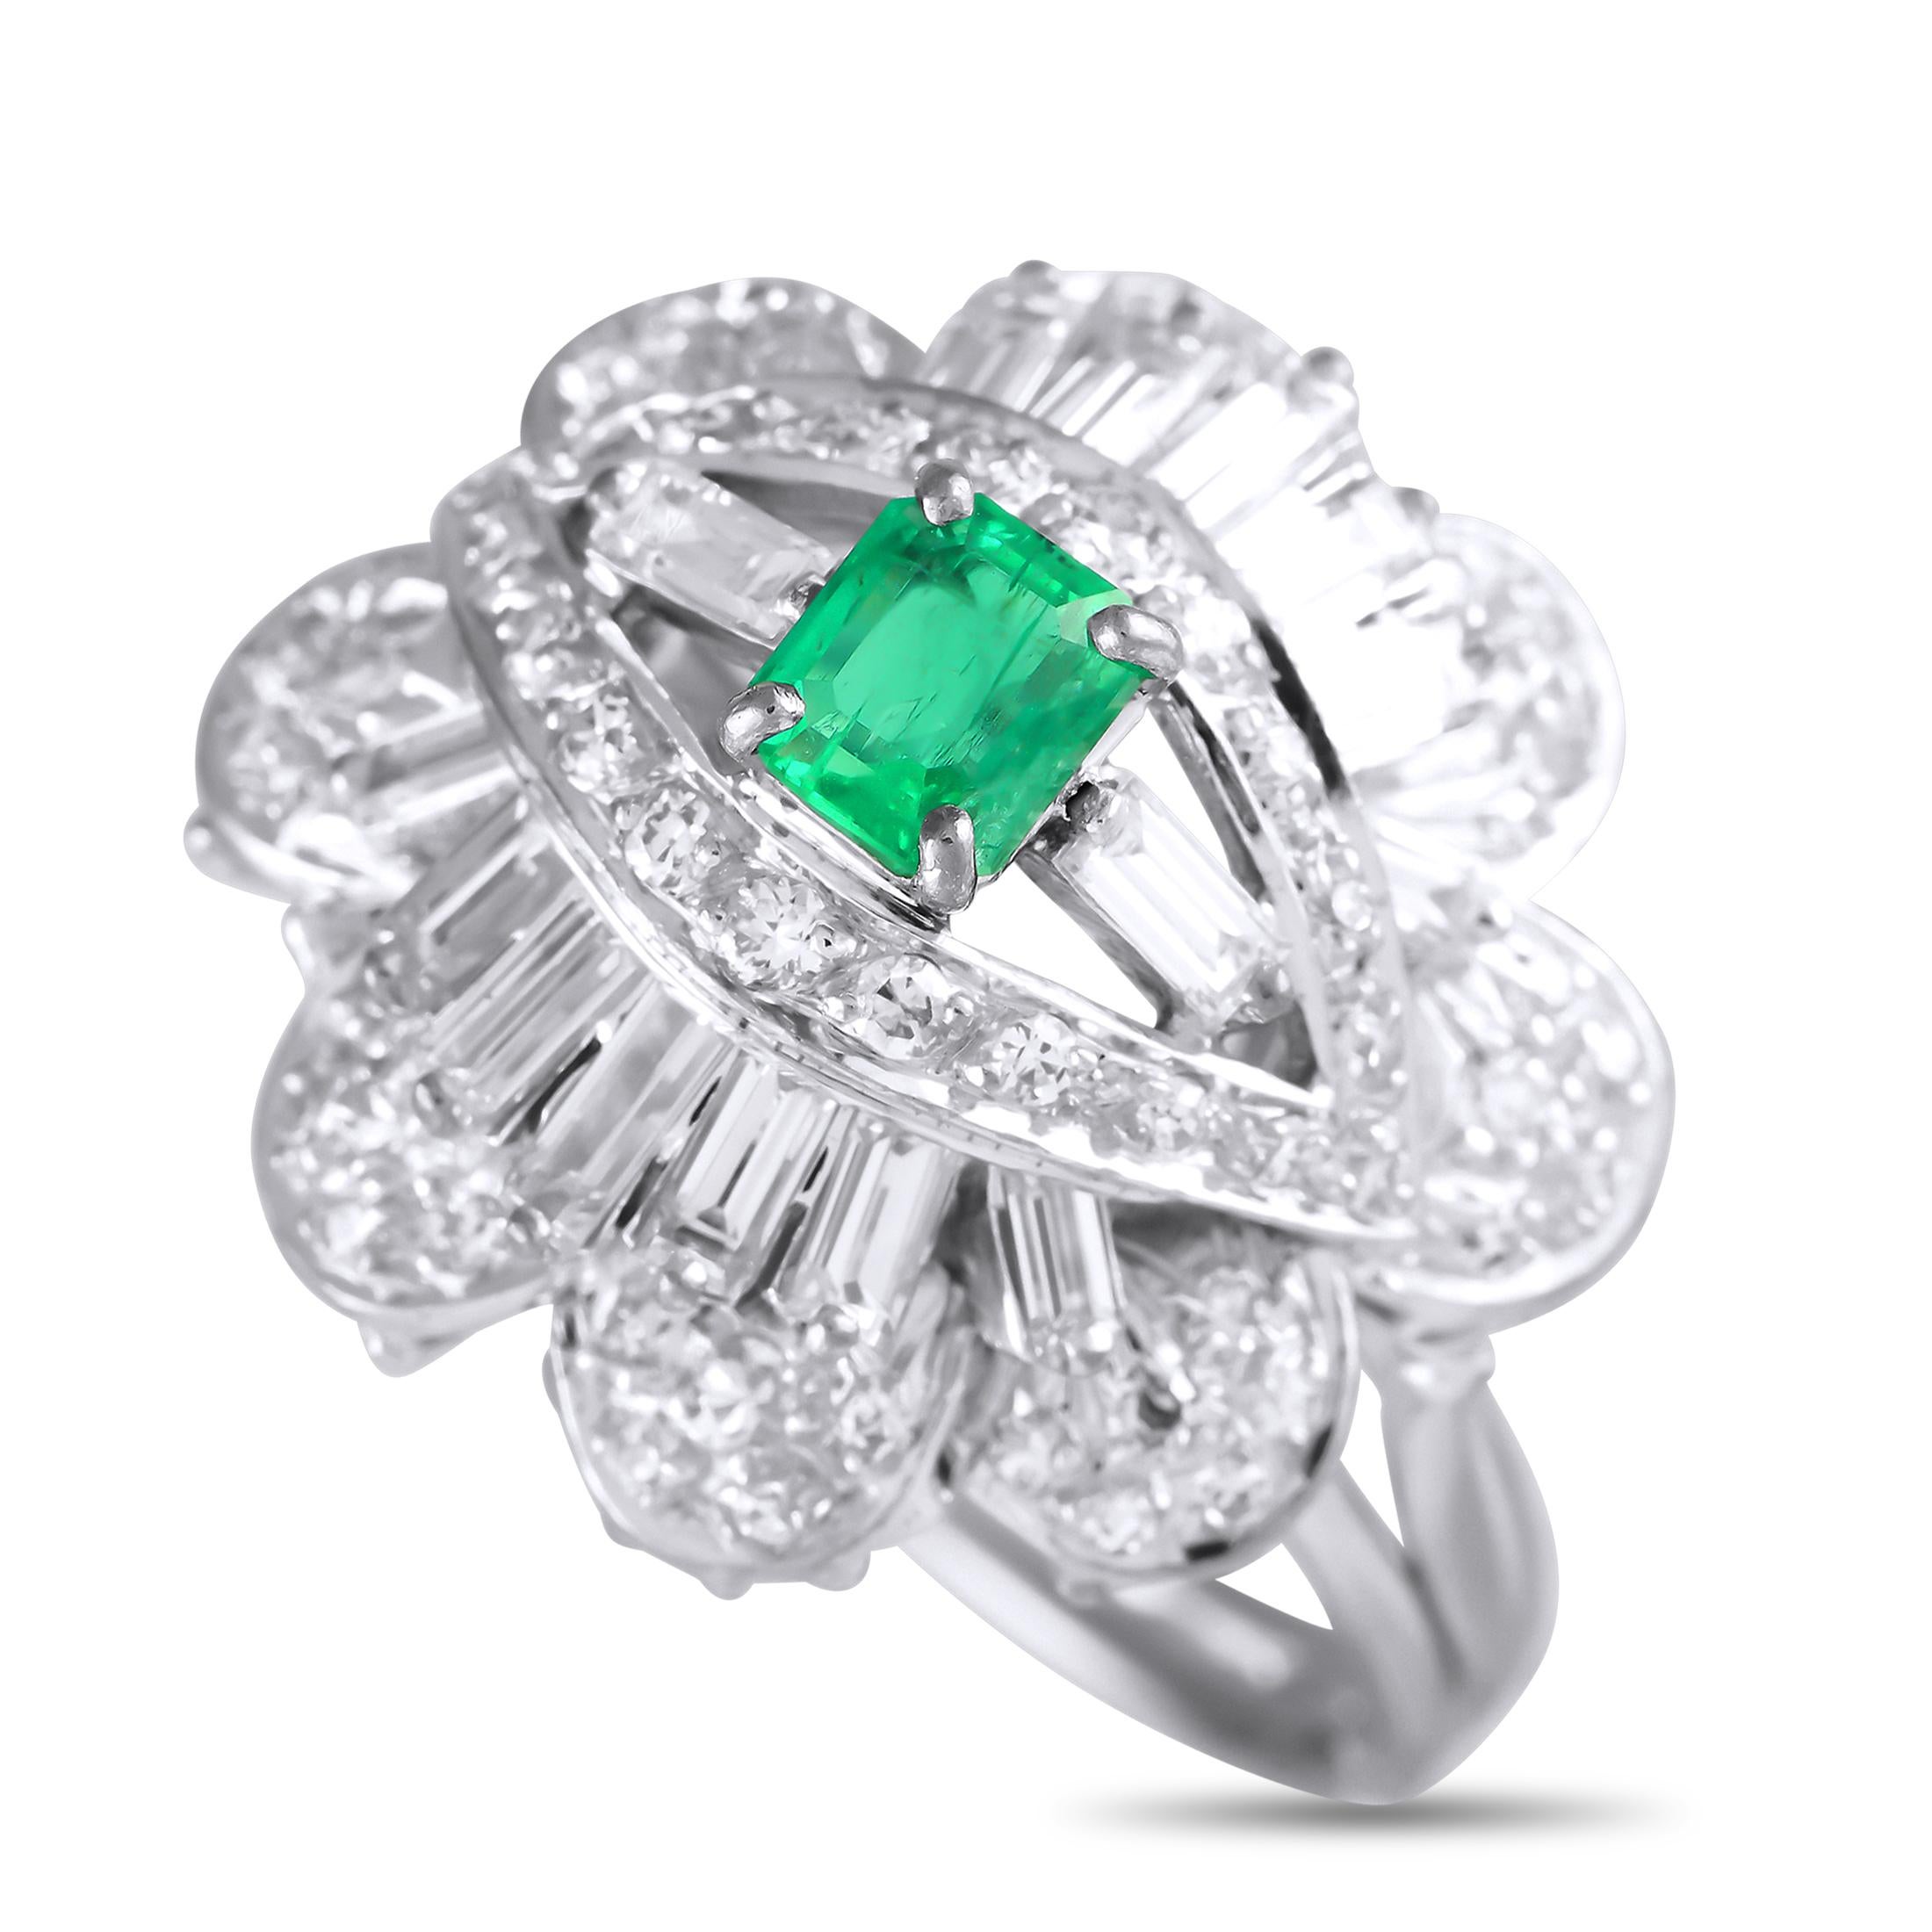 18K White Gold 1.30ct Diamond and Emerald Ring MF05-020124 In Excellent Condition For Sale In Southampton, PA